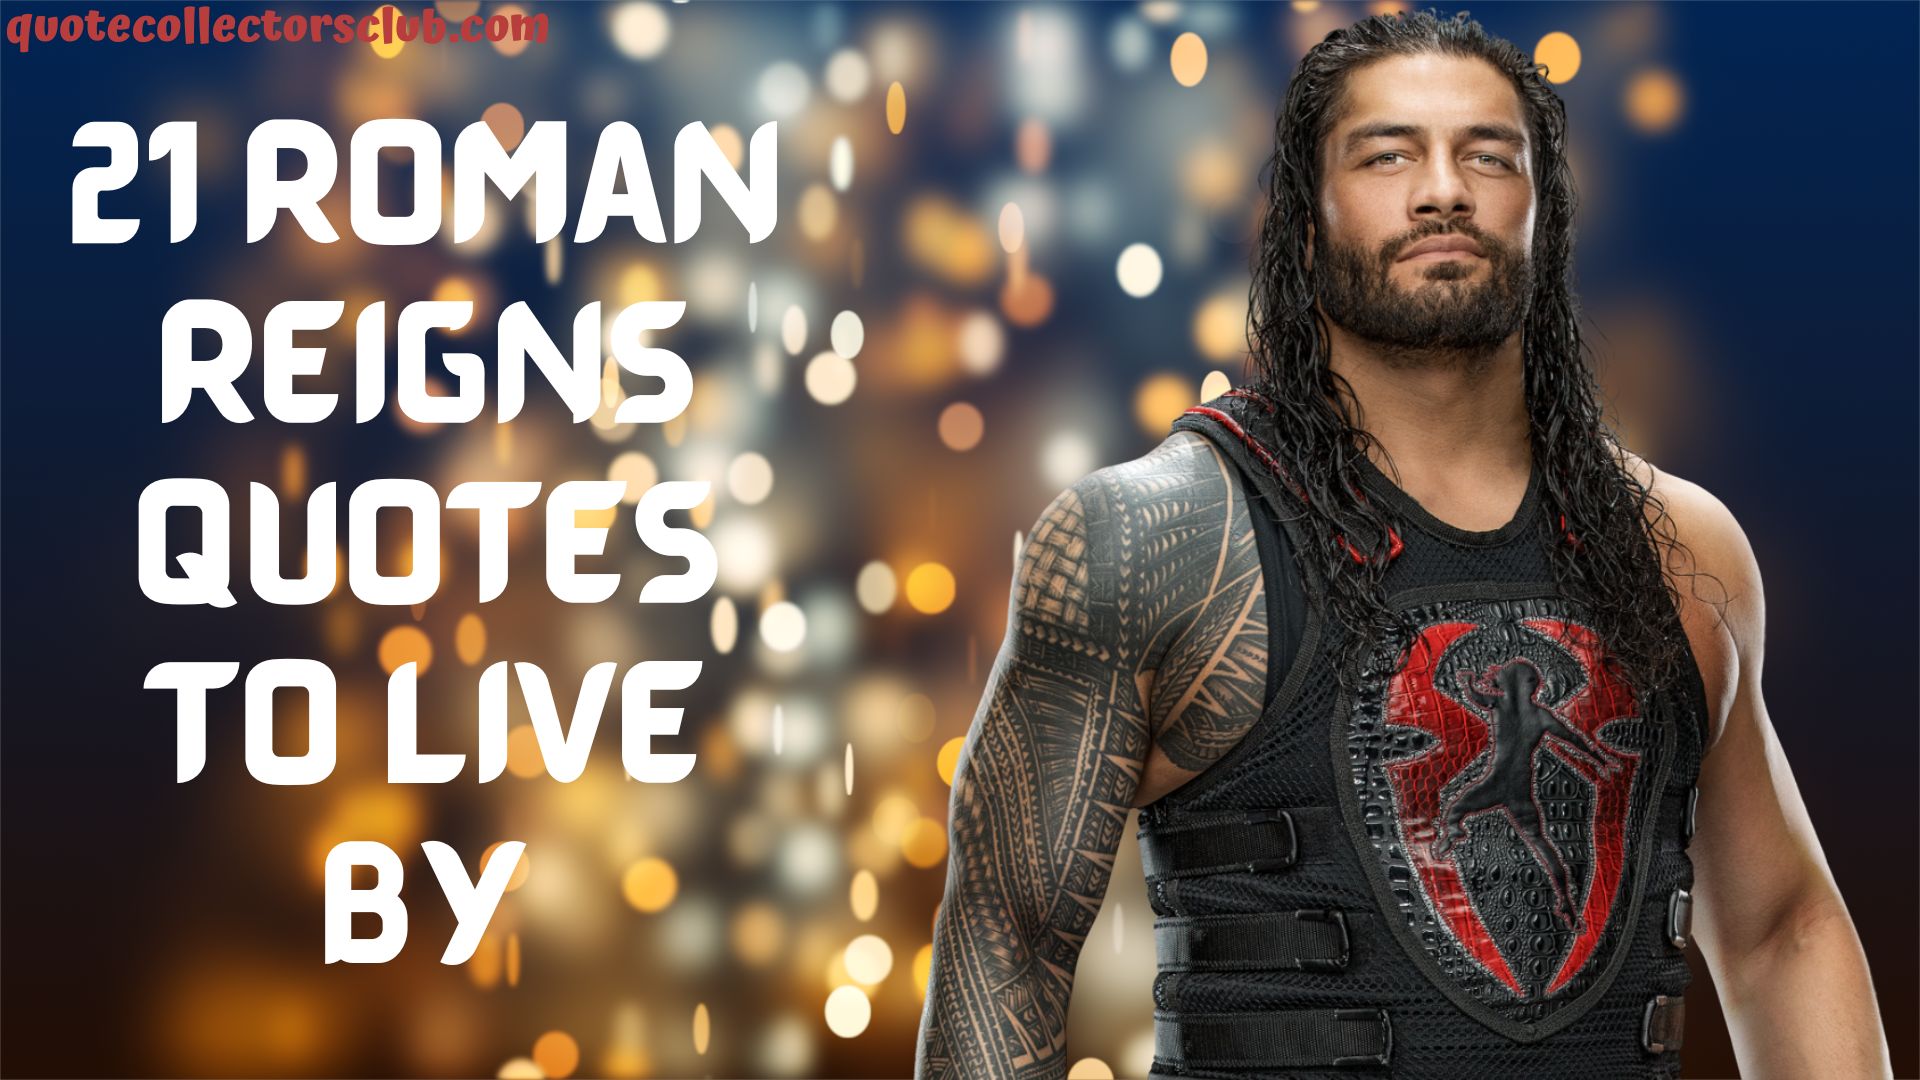 22 Roman Reigns Quotes To Live By Quote Collectors Club